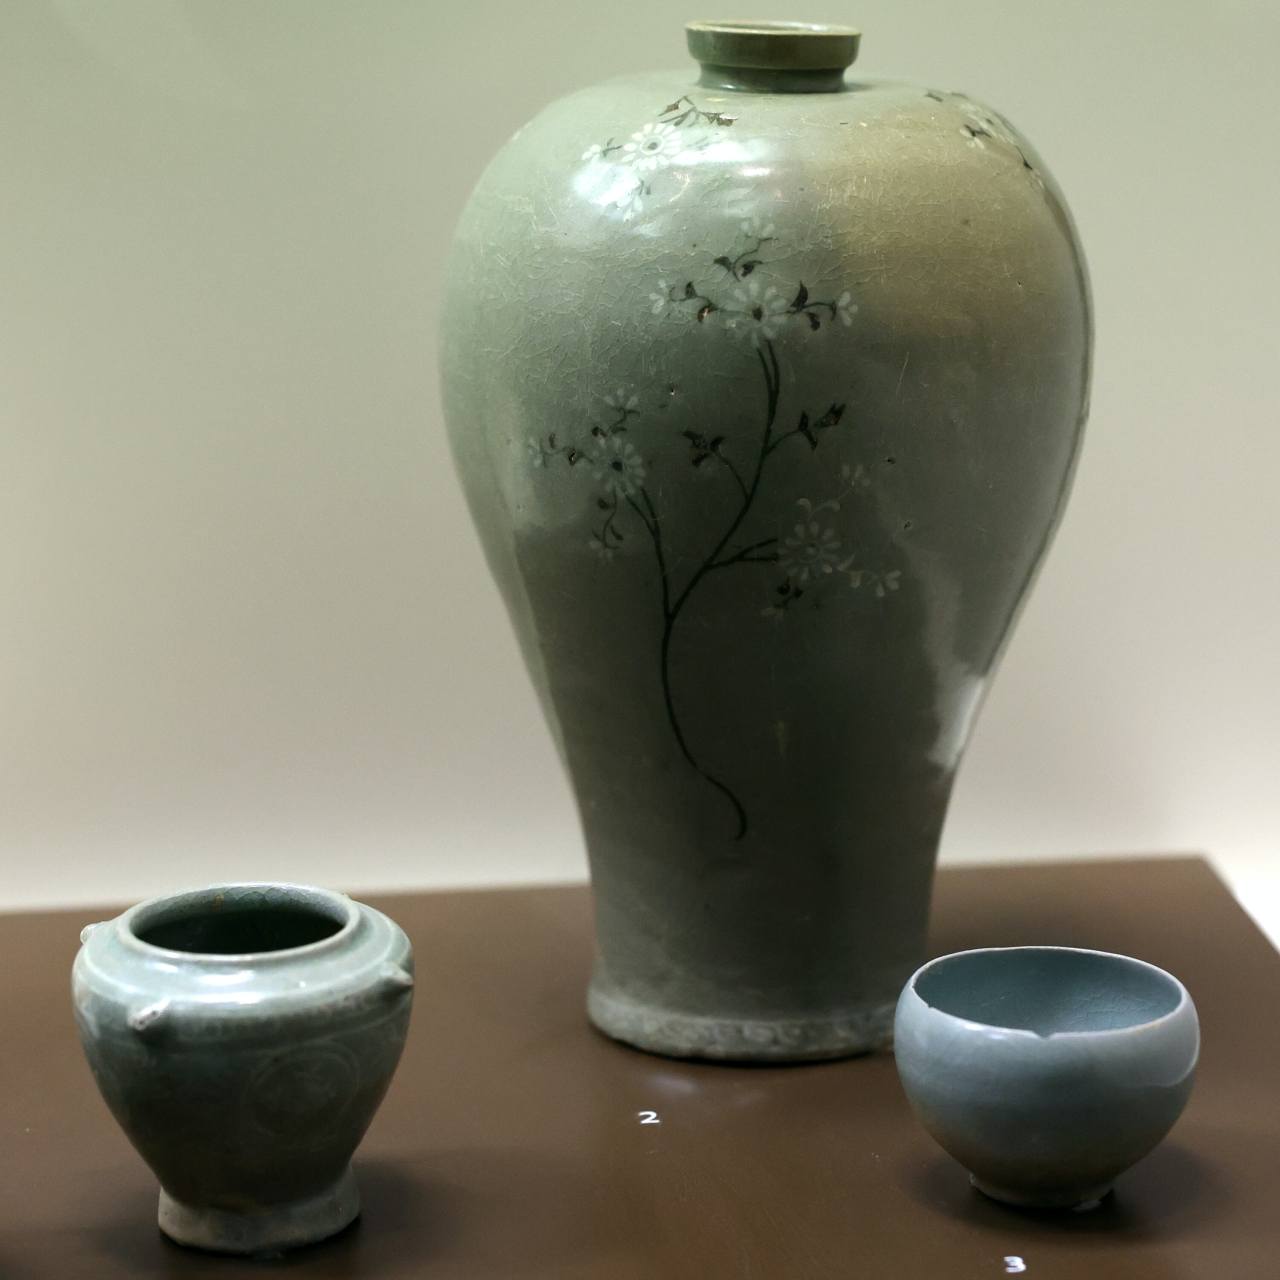 An example of Korean pottery includes this Celadon Maebyeong Plum bottle from the Goryeo period. (Photo © Hyungwon Kang)